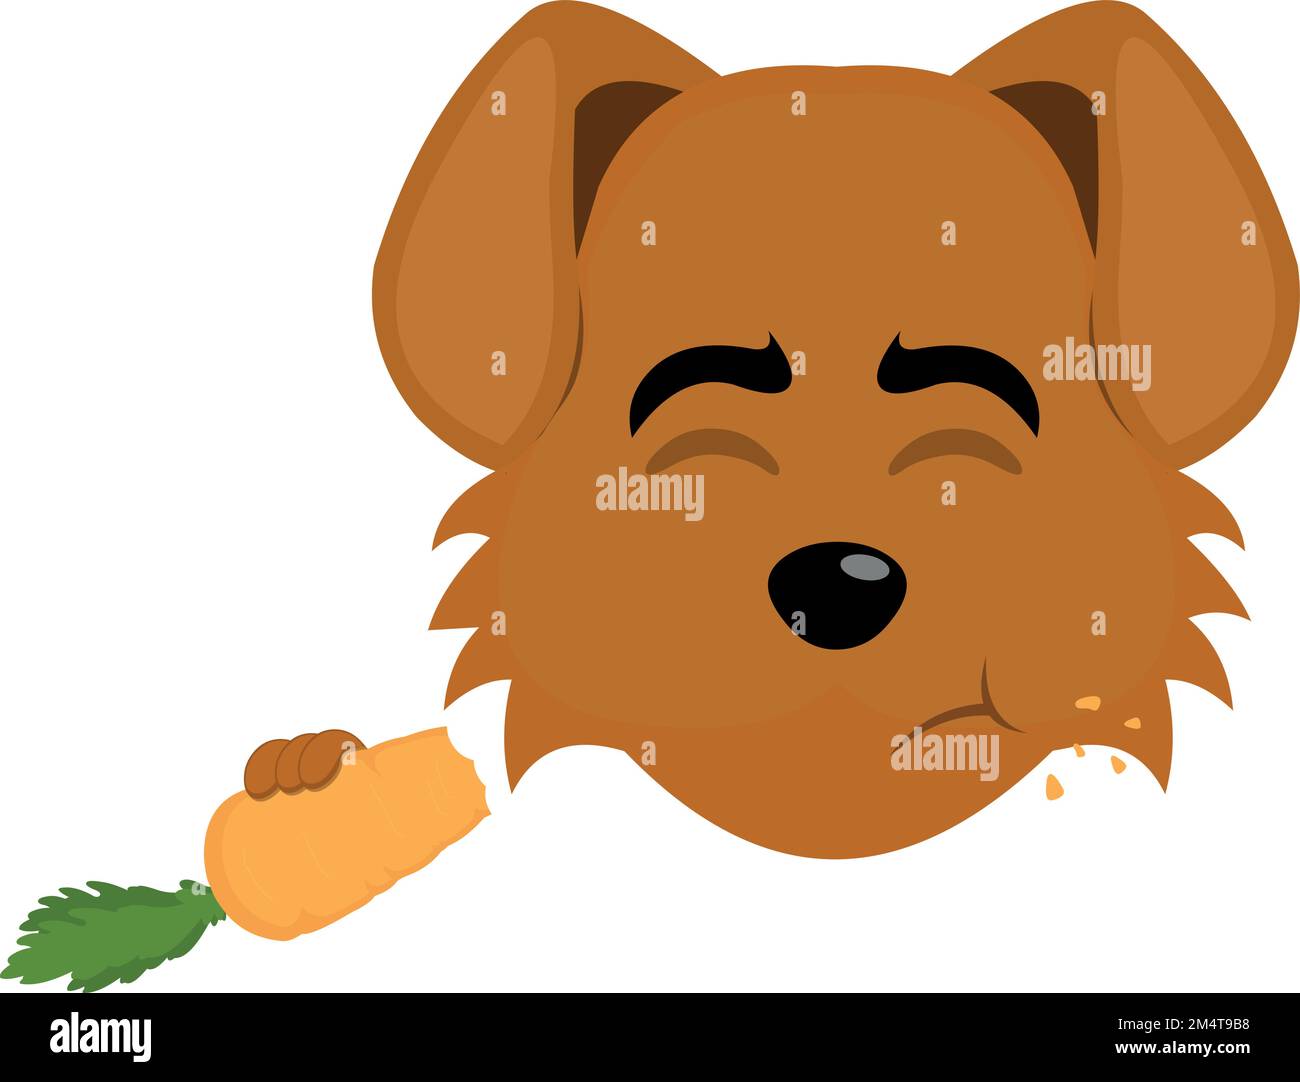 vector illustration of the face cartoon dog eating a carrot Stock Vector